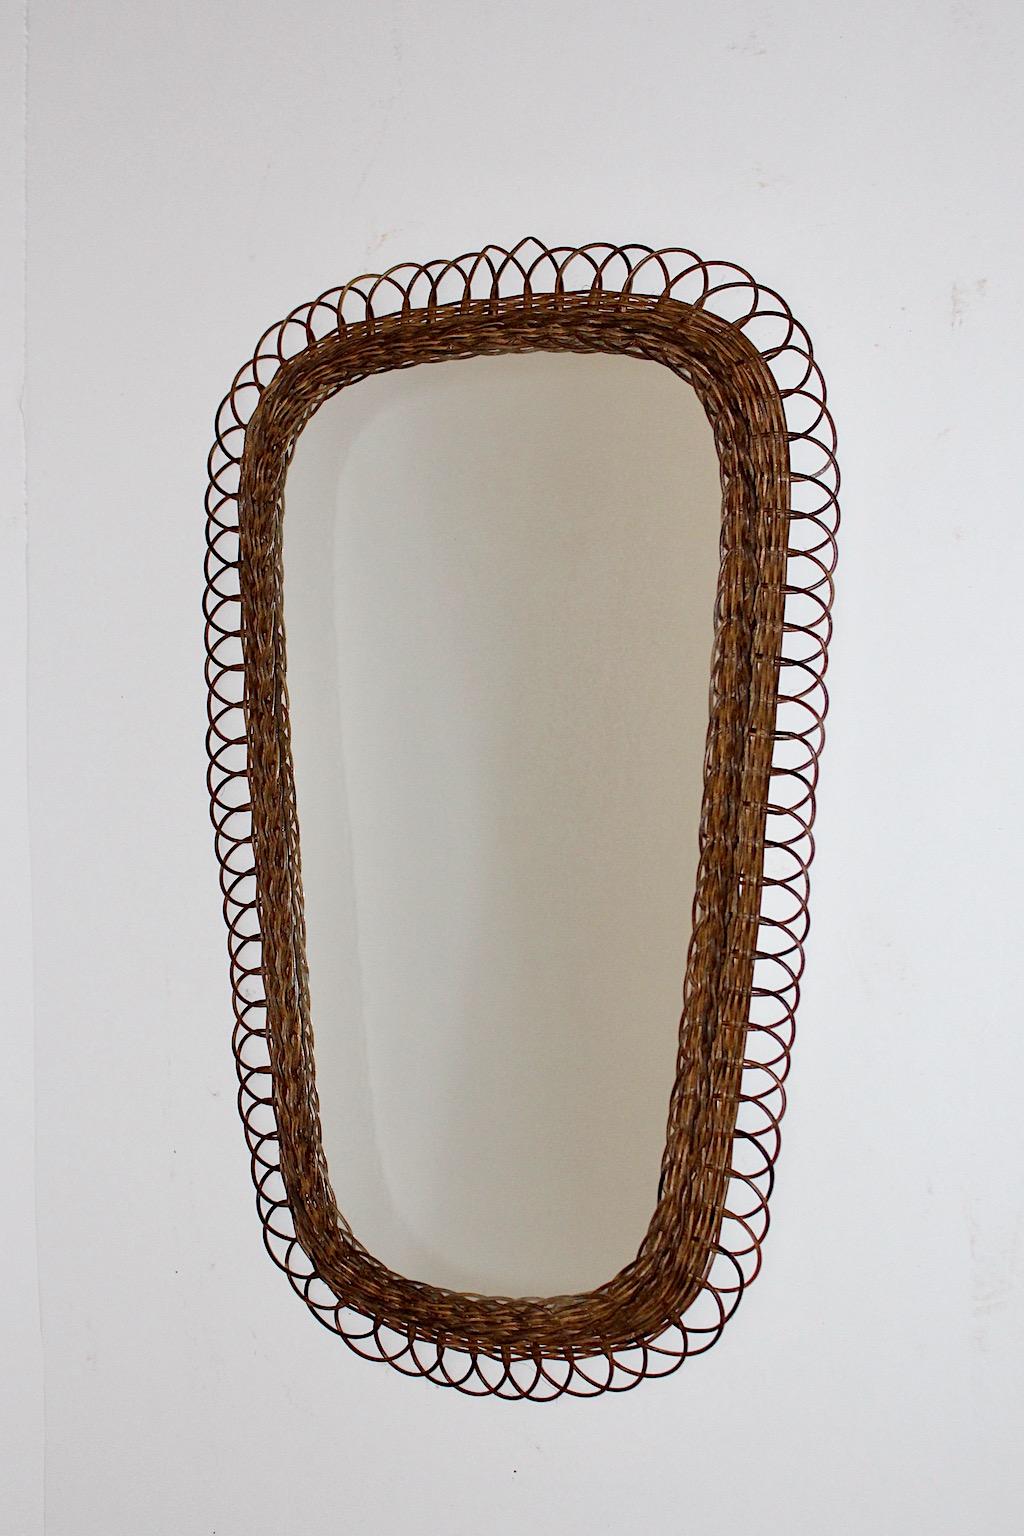 Mid Century Modern vintage wall mirror oval like framed with willow loops and mirror glass Germany 1960s.
While the dark brown willow work frame is in good condition without damages, the mirror glass shows cloudy mirror patina.
Good condition with